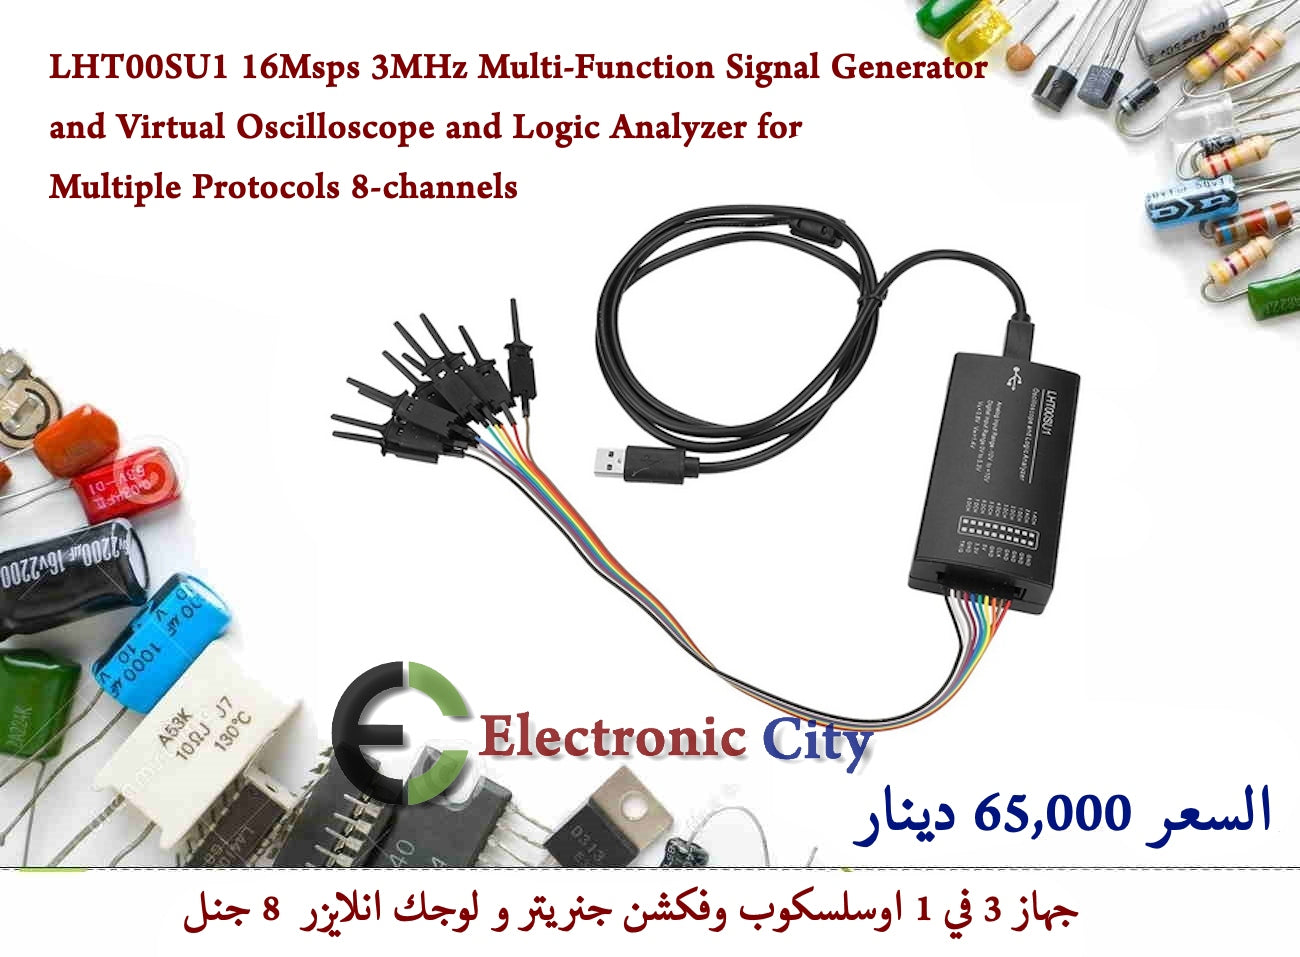 LHT00SU1 16Msps 3MHz Multi-Function Signal Generator and Virtual